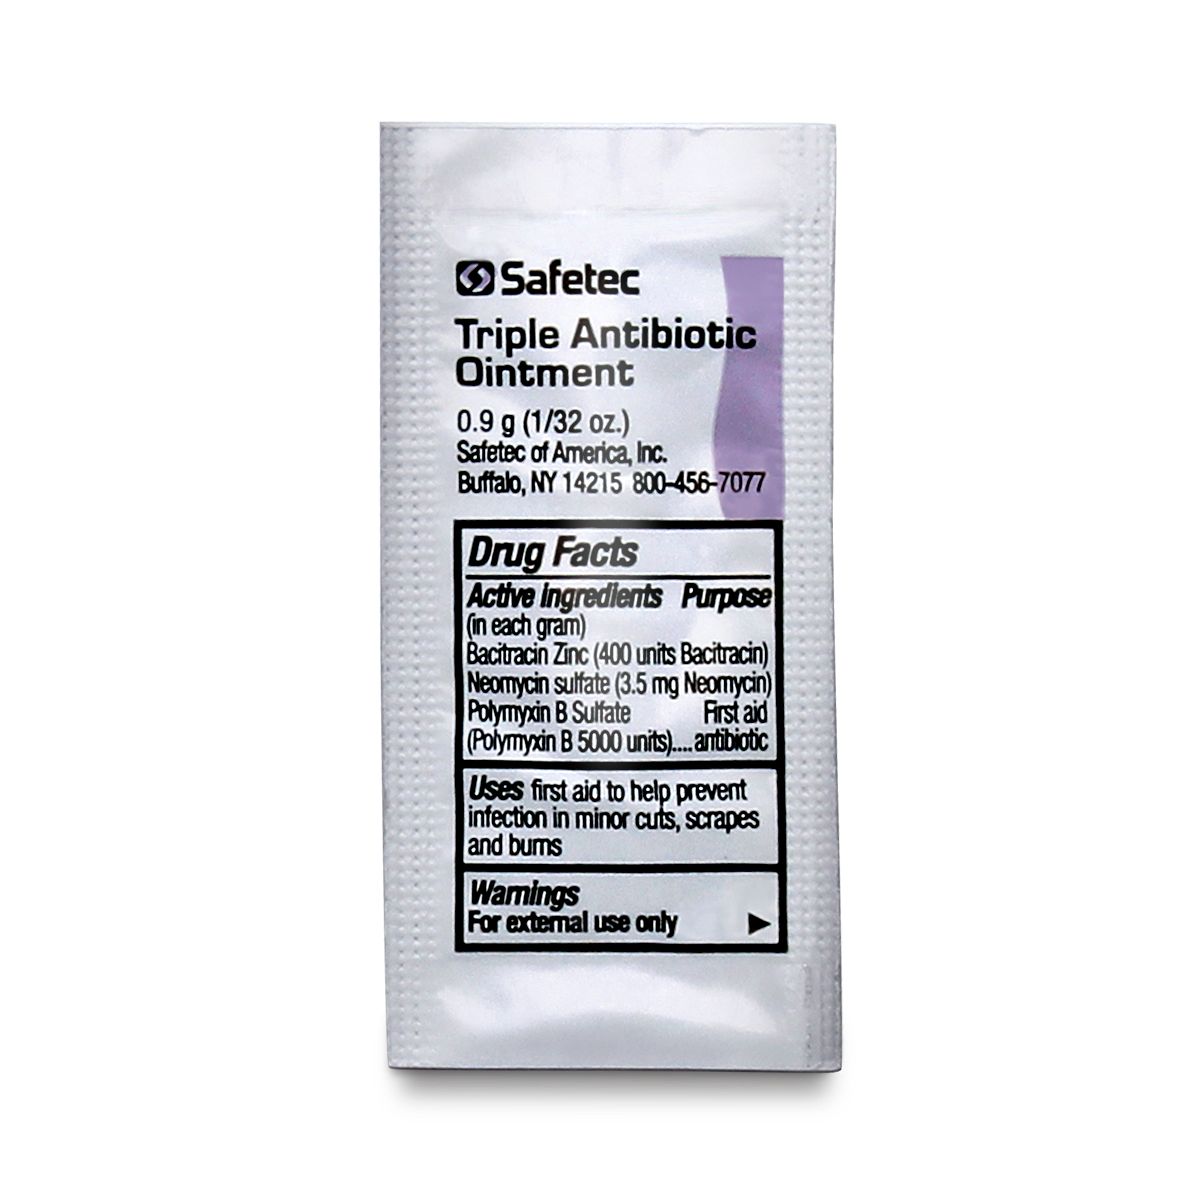 SafeTec - Triple Antibiotic Ointment - 0.9g Pouch data-zoom=